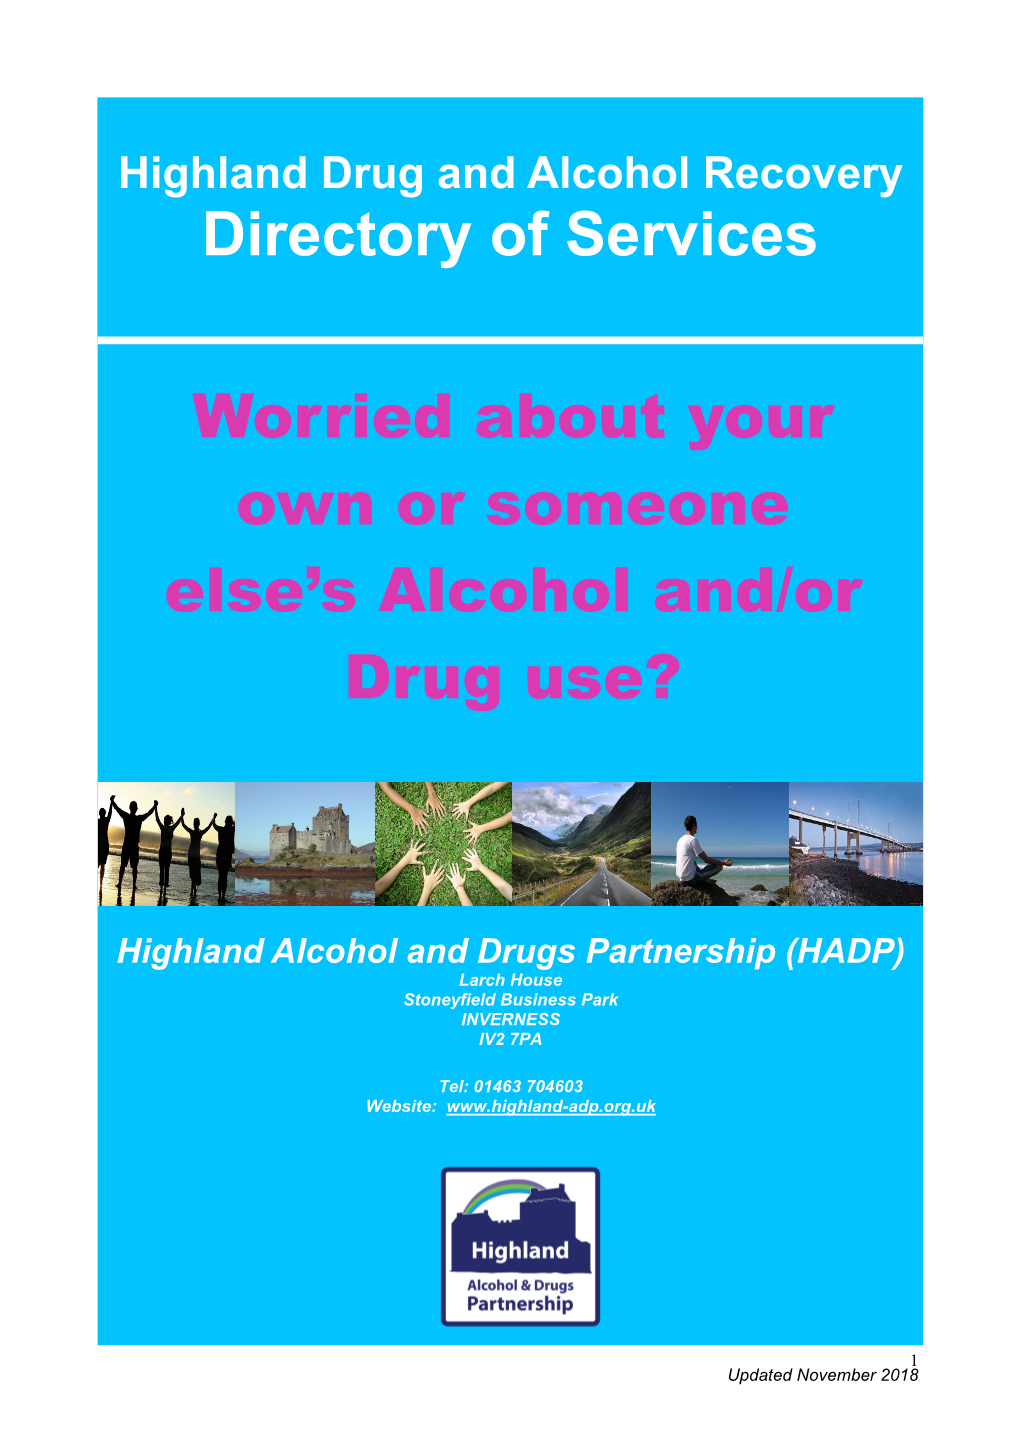 Directory of Services Worried About Your Own Or Someone Else's Alcohol And/Or Drug Use?